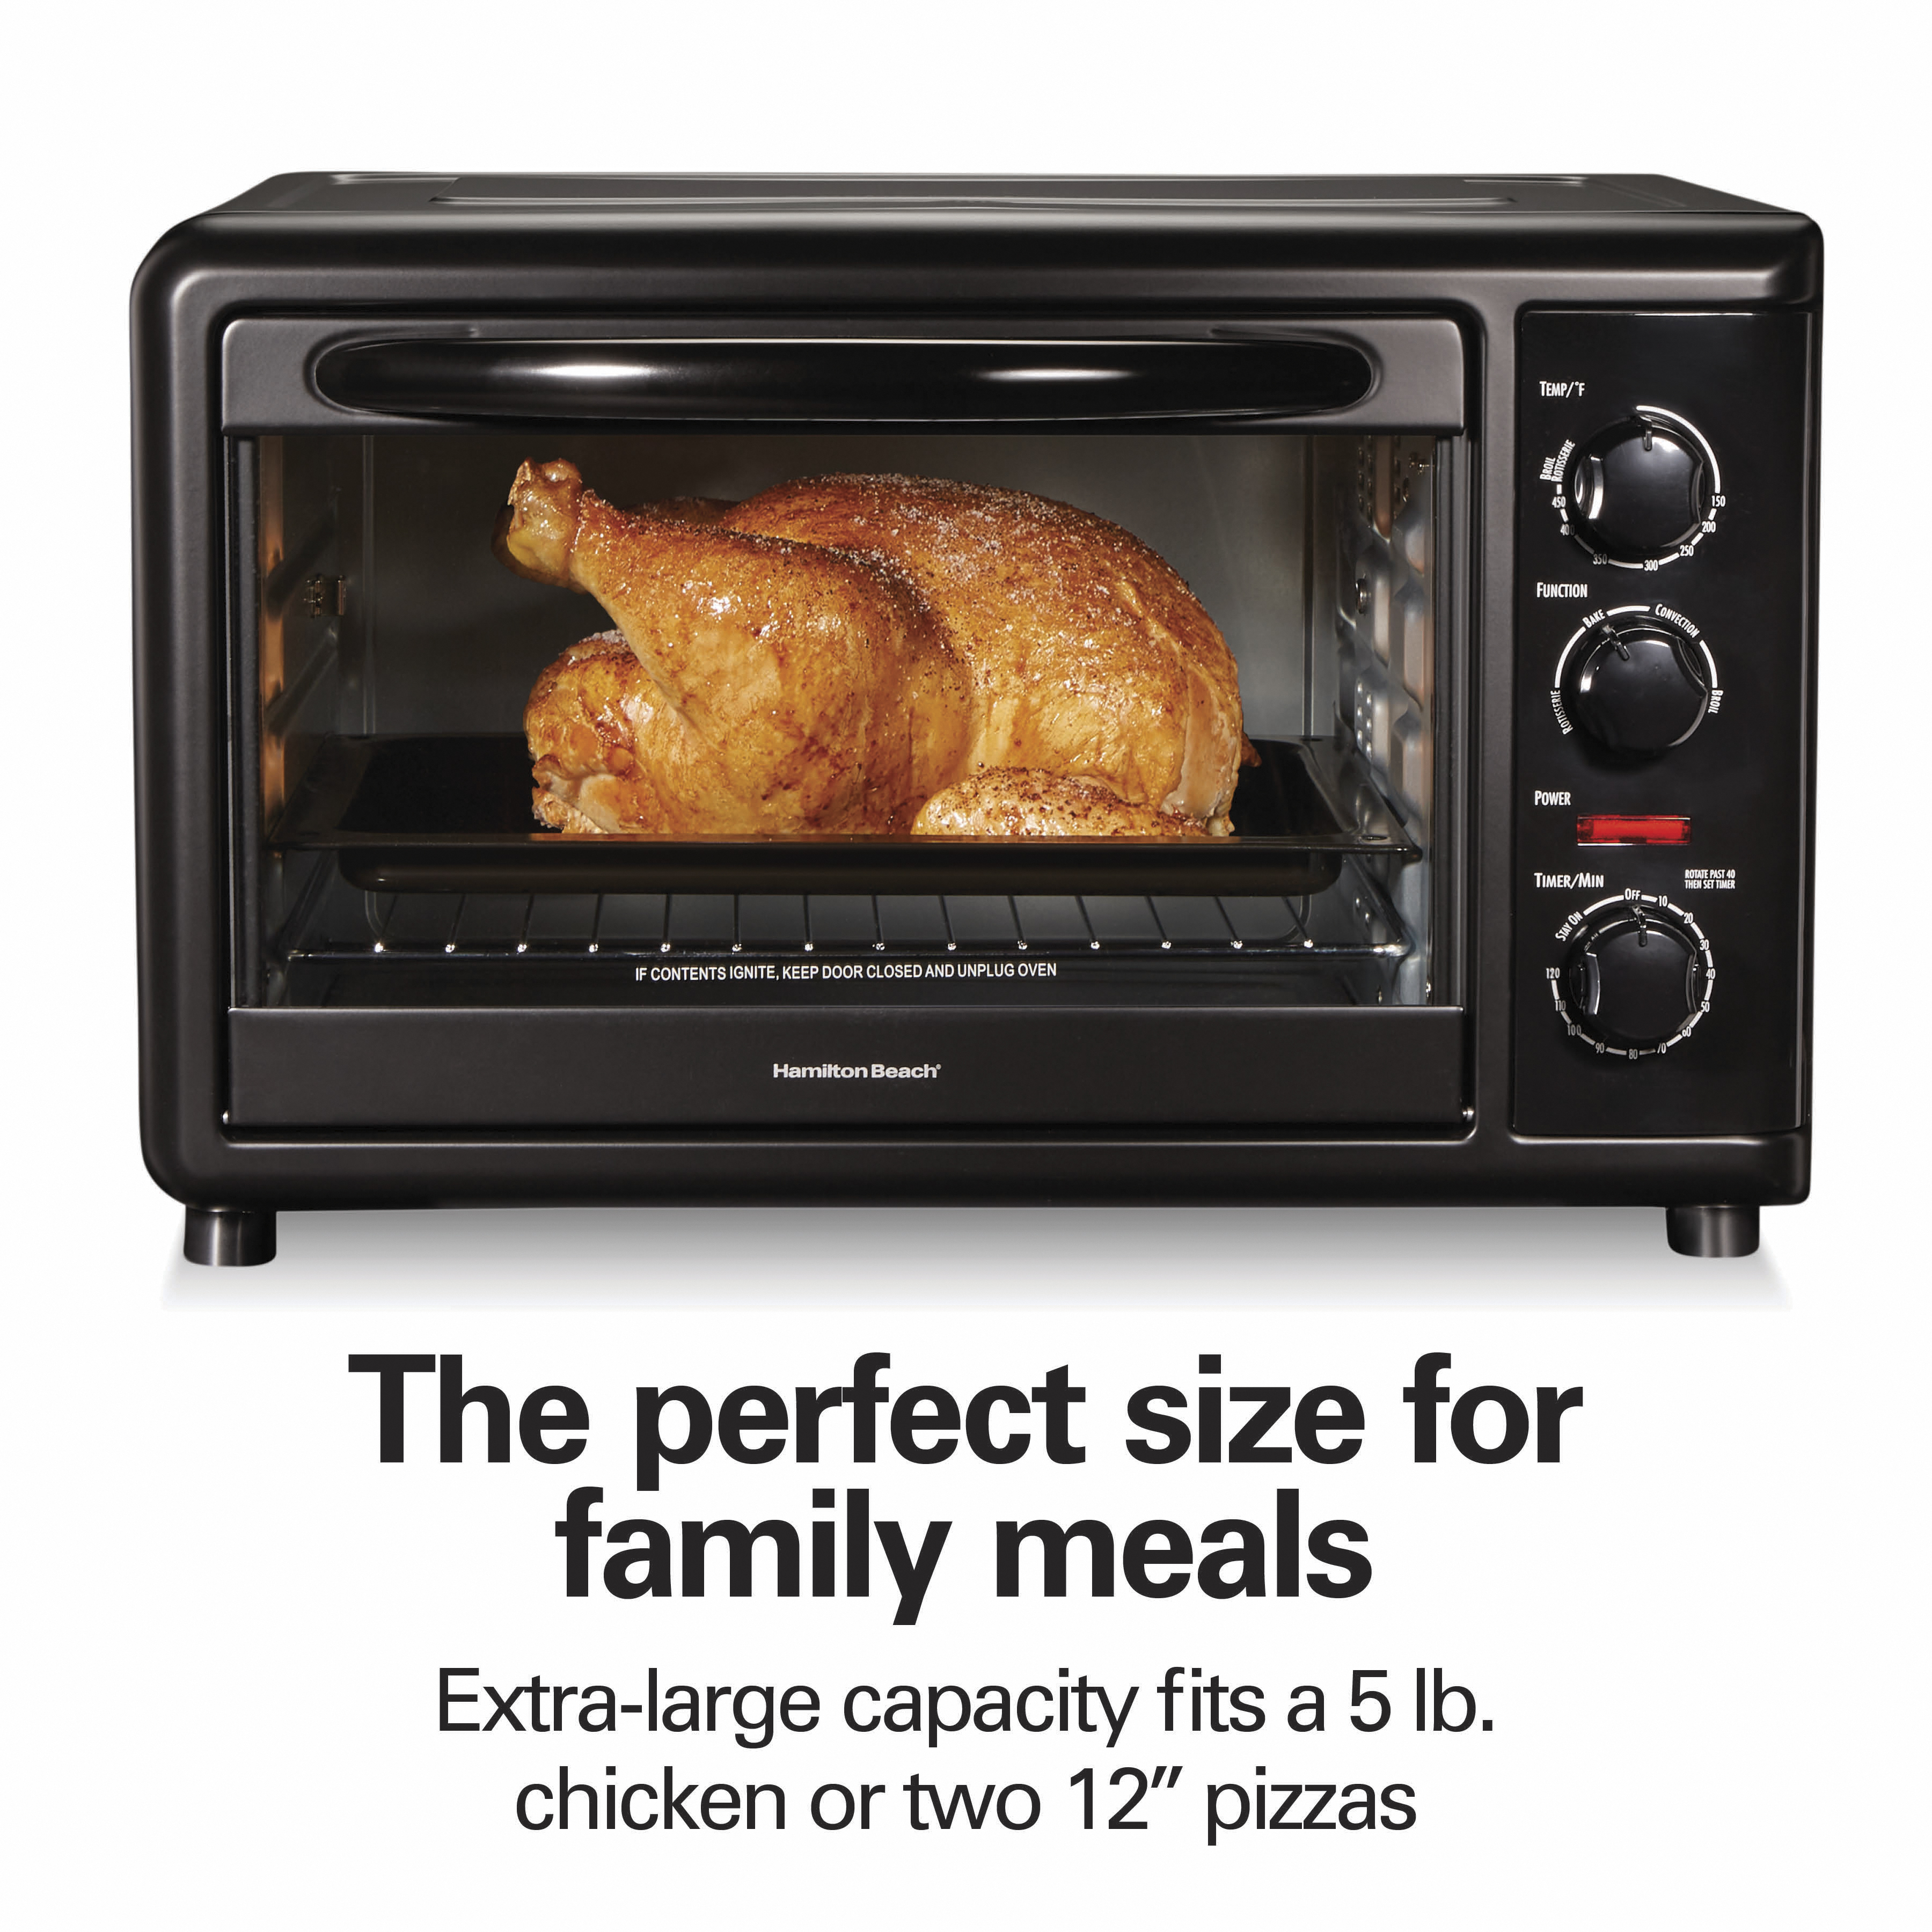 Hamilton Beach Countertop Oven with Convection & Rotisserie, 1,500 Watts, Black, 31101D - image 3 of 8